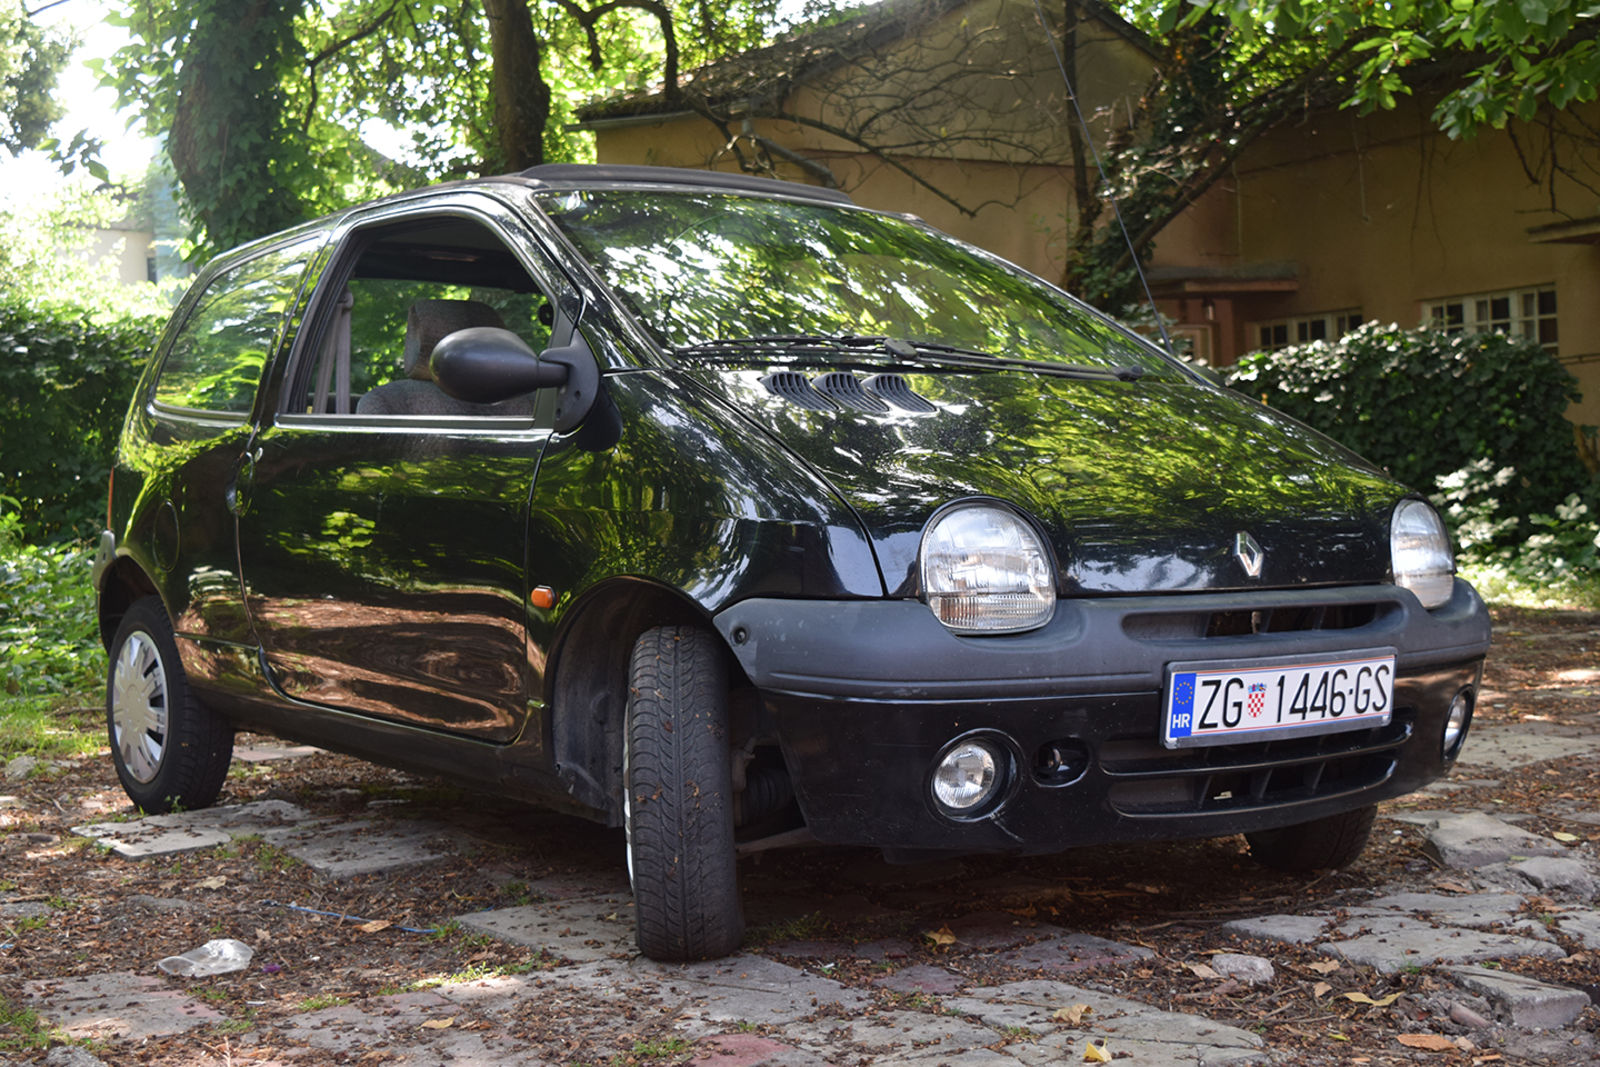 Illustration for article titled I promised pics of my Twingo